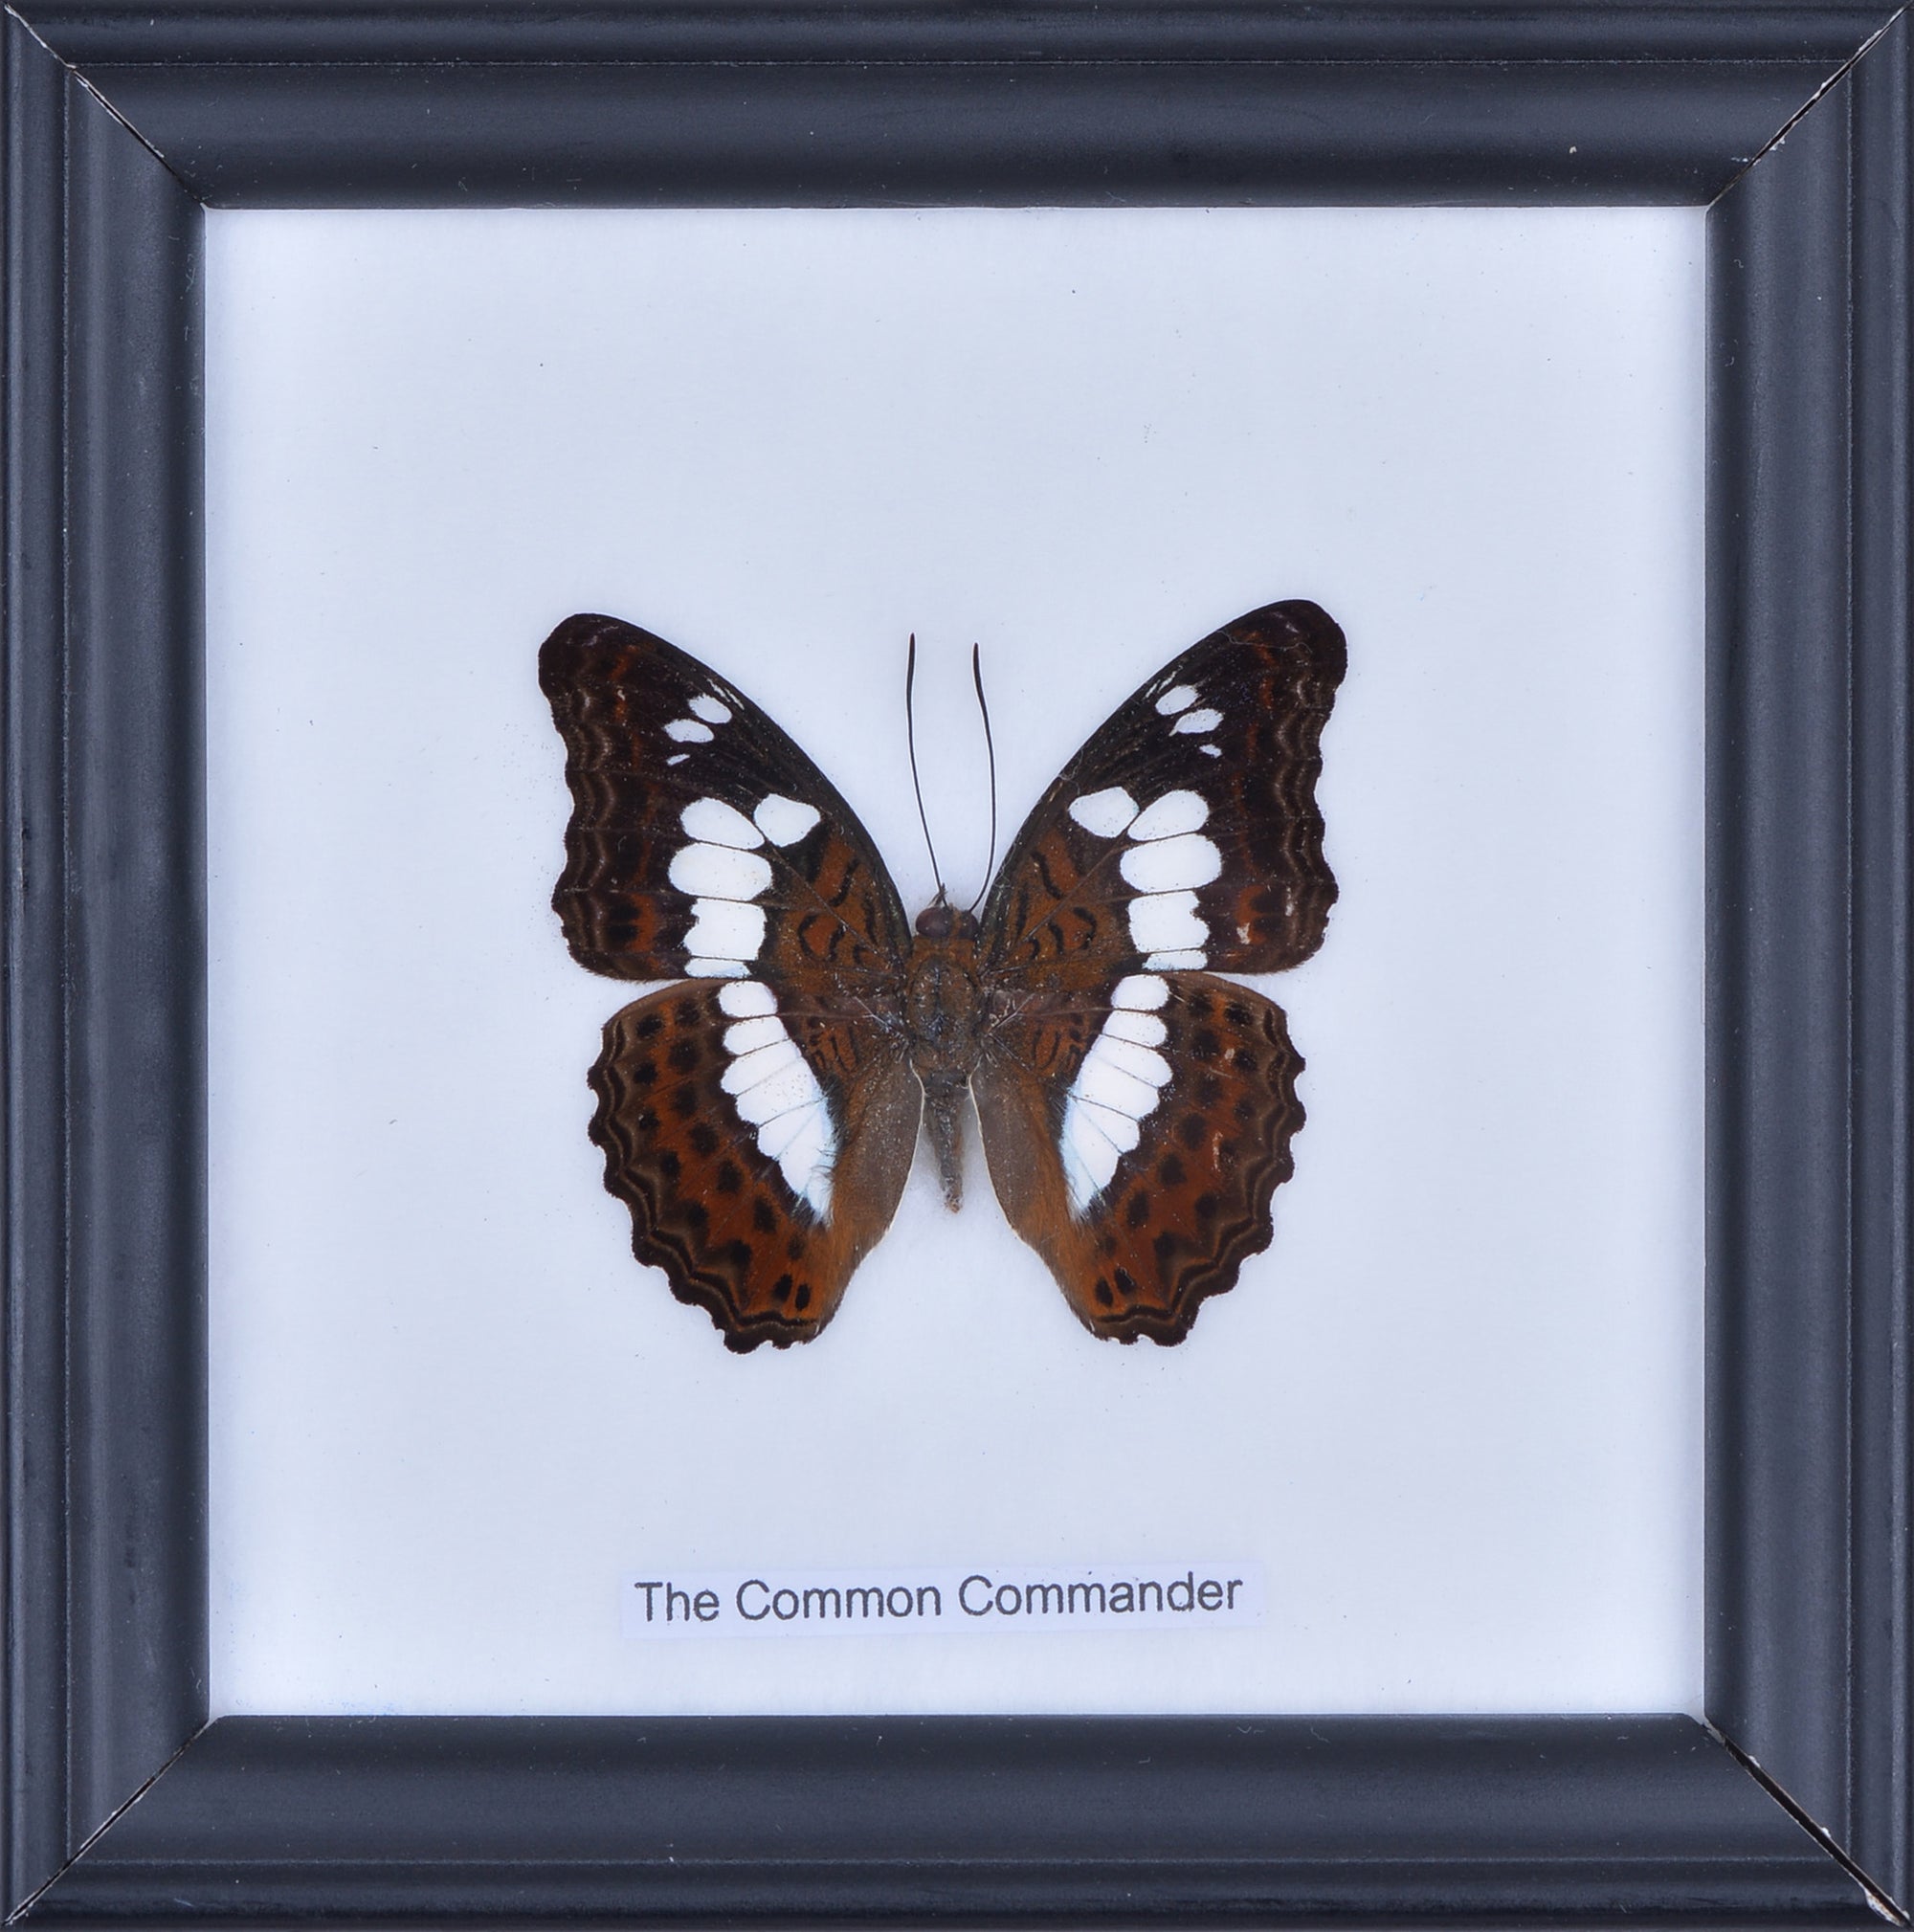 THE COMMON COMMANDER, Real Butterfly Mounted Under Glass, Wall Hanging Home Décor Framed 5 x 5 In. Gift Boxed